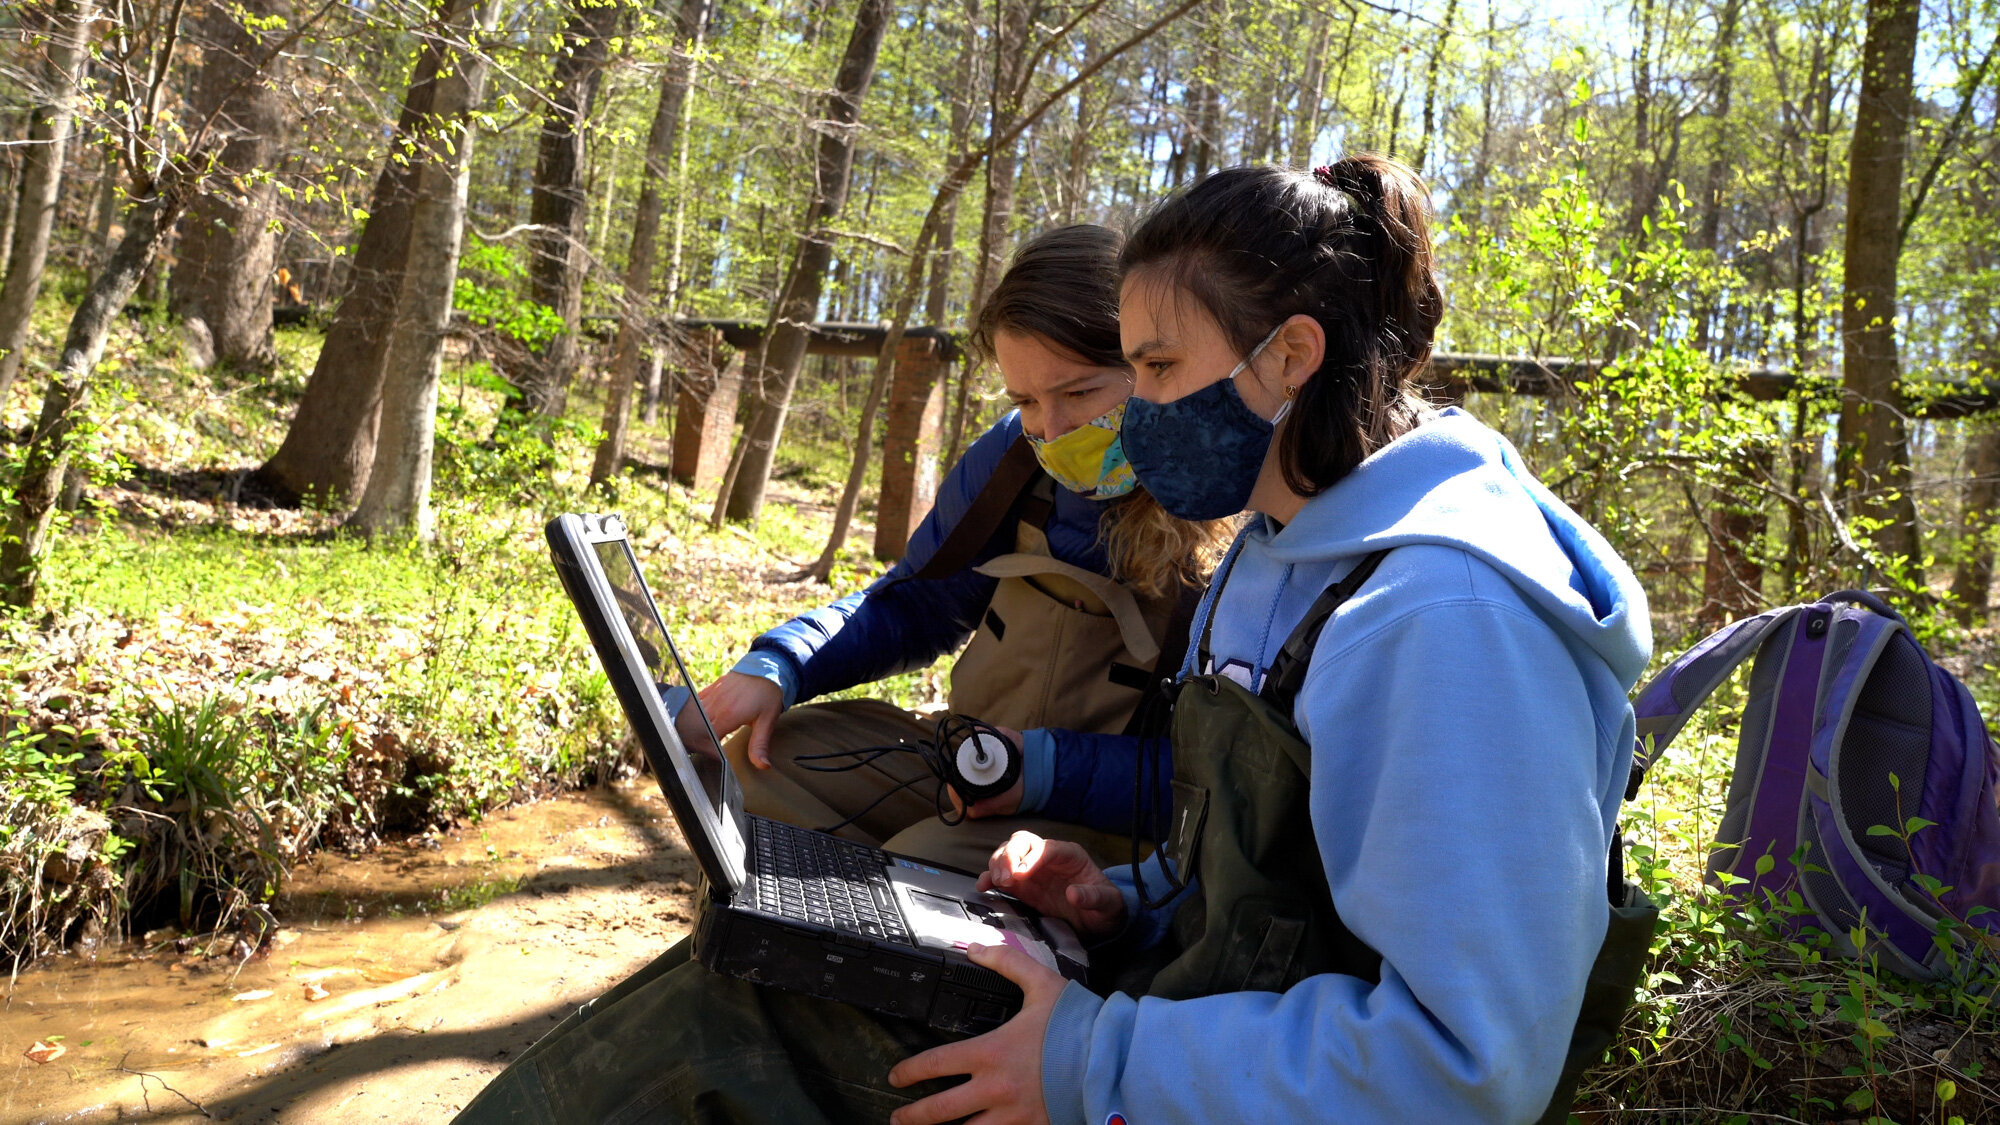  Farquhar (left) downloads data from a water sensor with Tessa Davis, another undergraduate researcher on the team. The data is also being collected and compared to local bio-retention ponds to determine whether beaver dams offer a cheaper alternativ